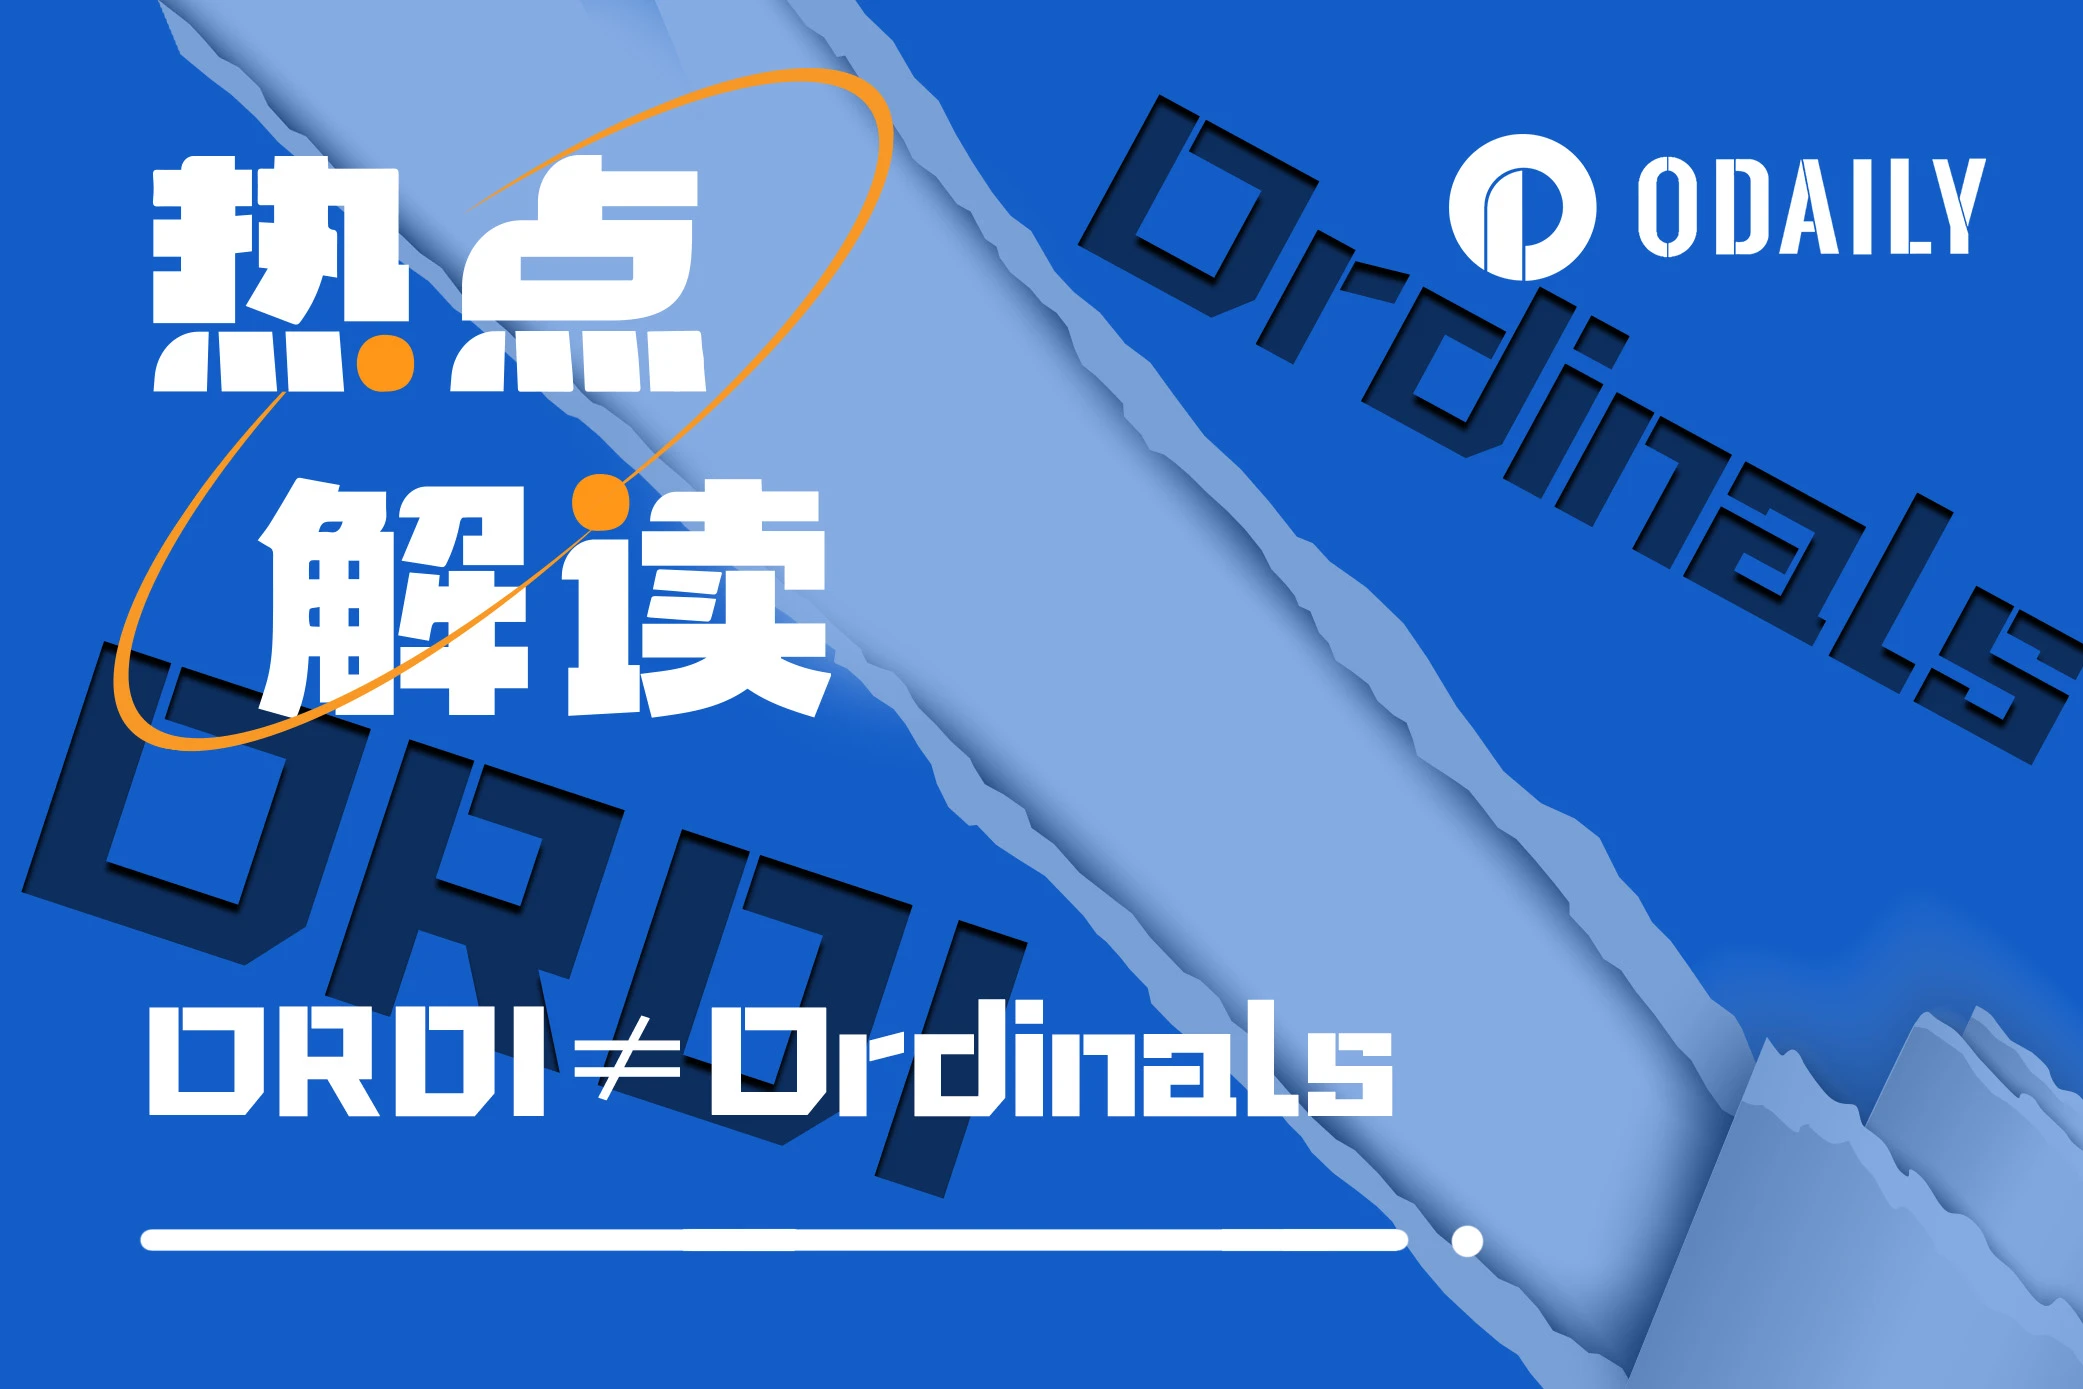 BTC Ecology-The founder of Ordinals asked Binance to remove ORDI, revealing the behind-the-scenes story